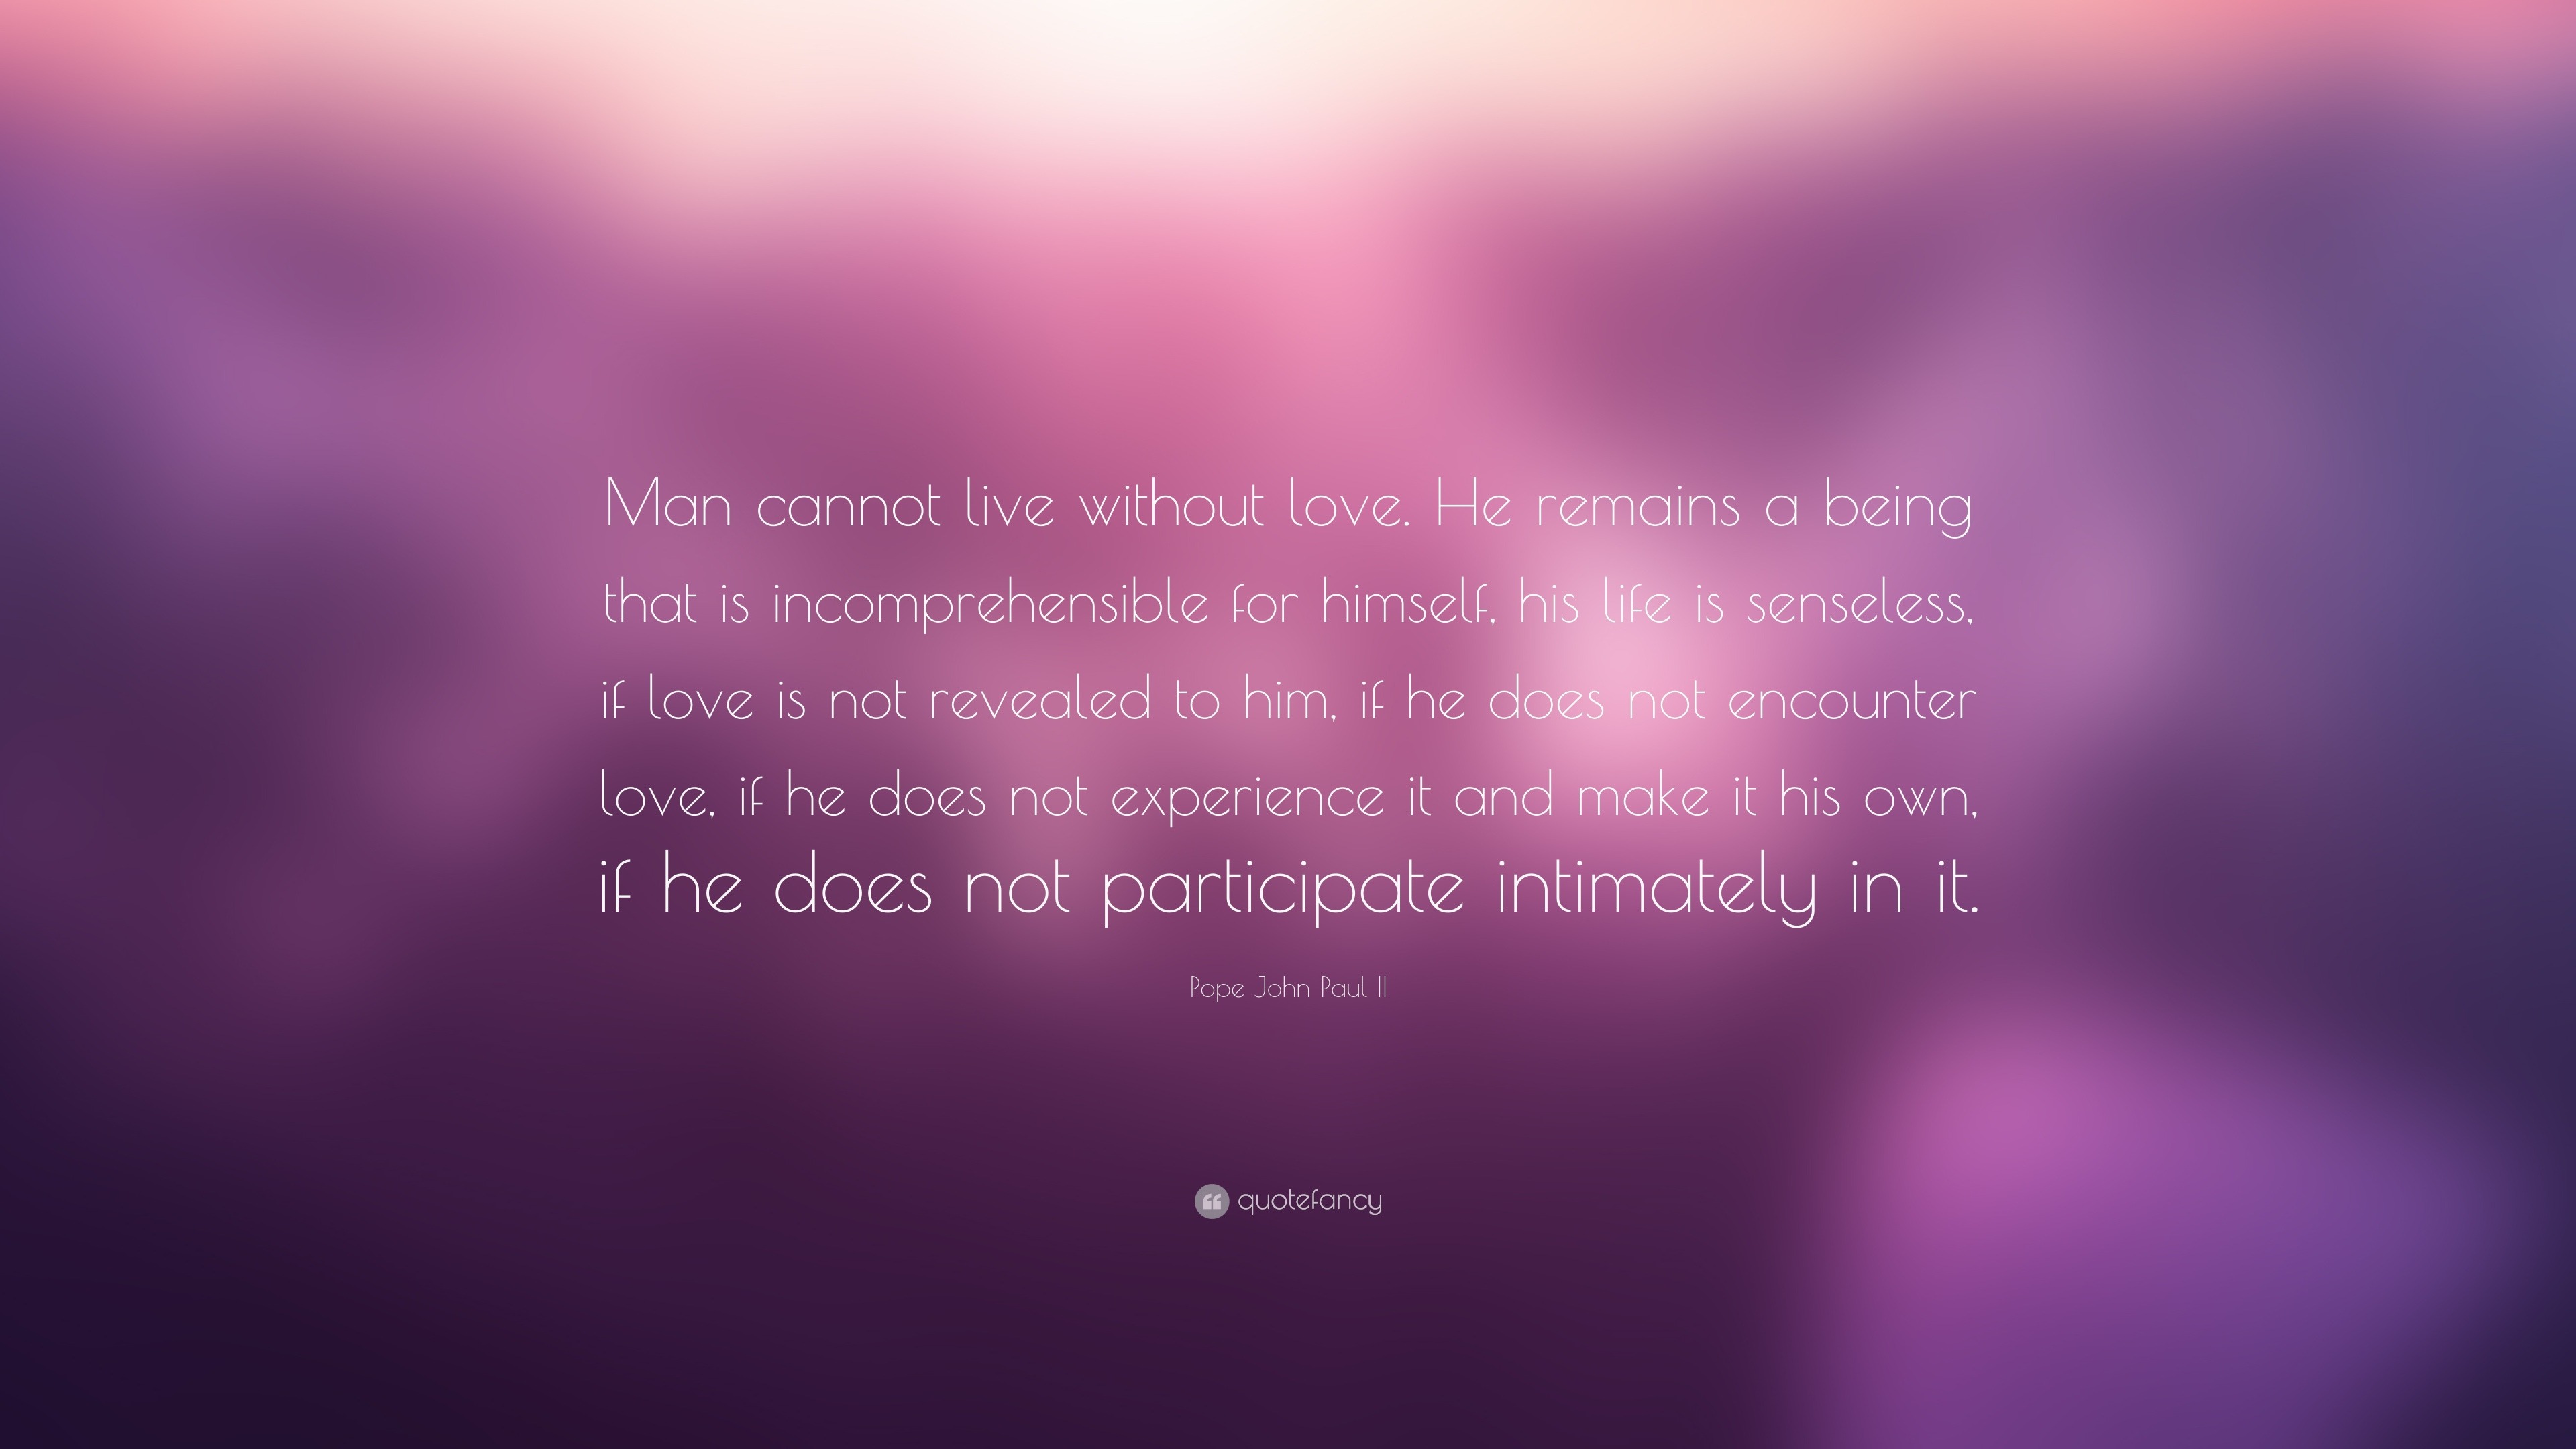 Pope John Paul II Quote: “Man cannot live without love. He remains a ...